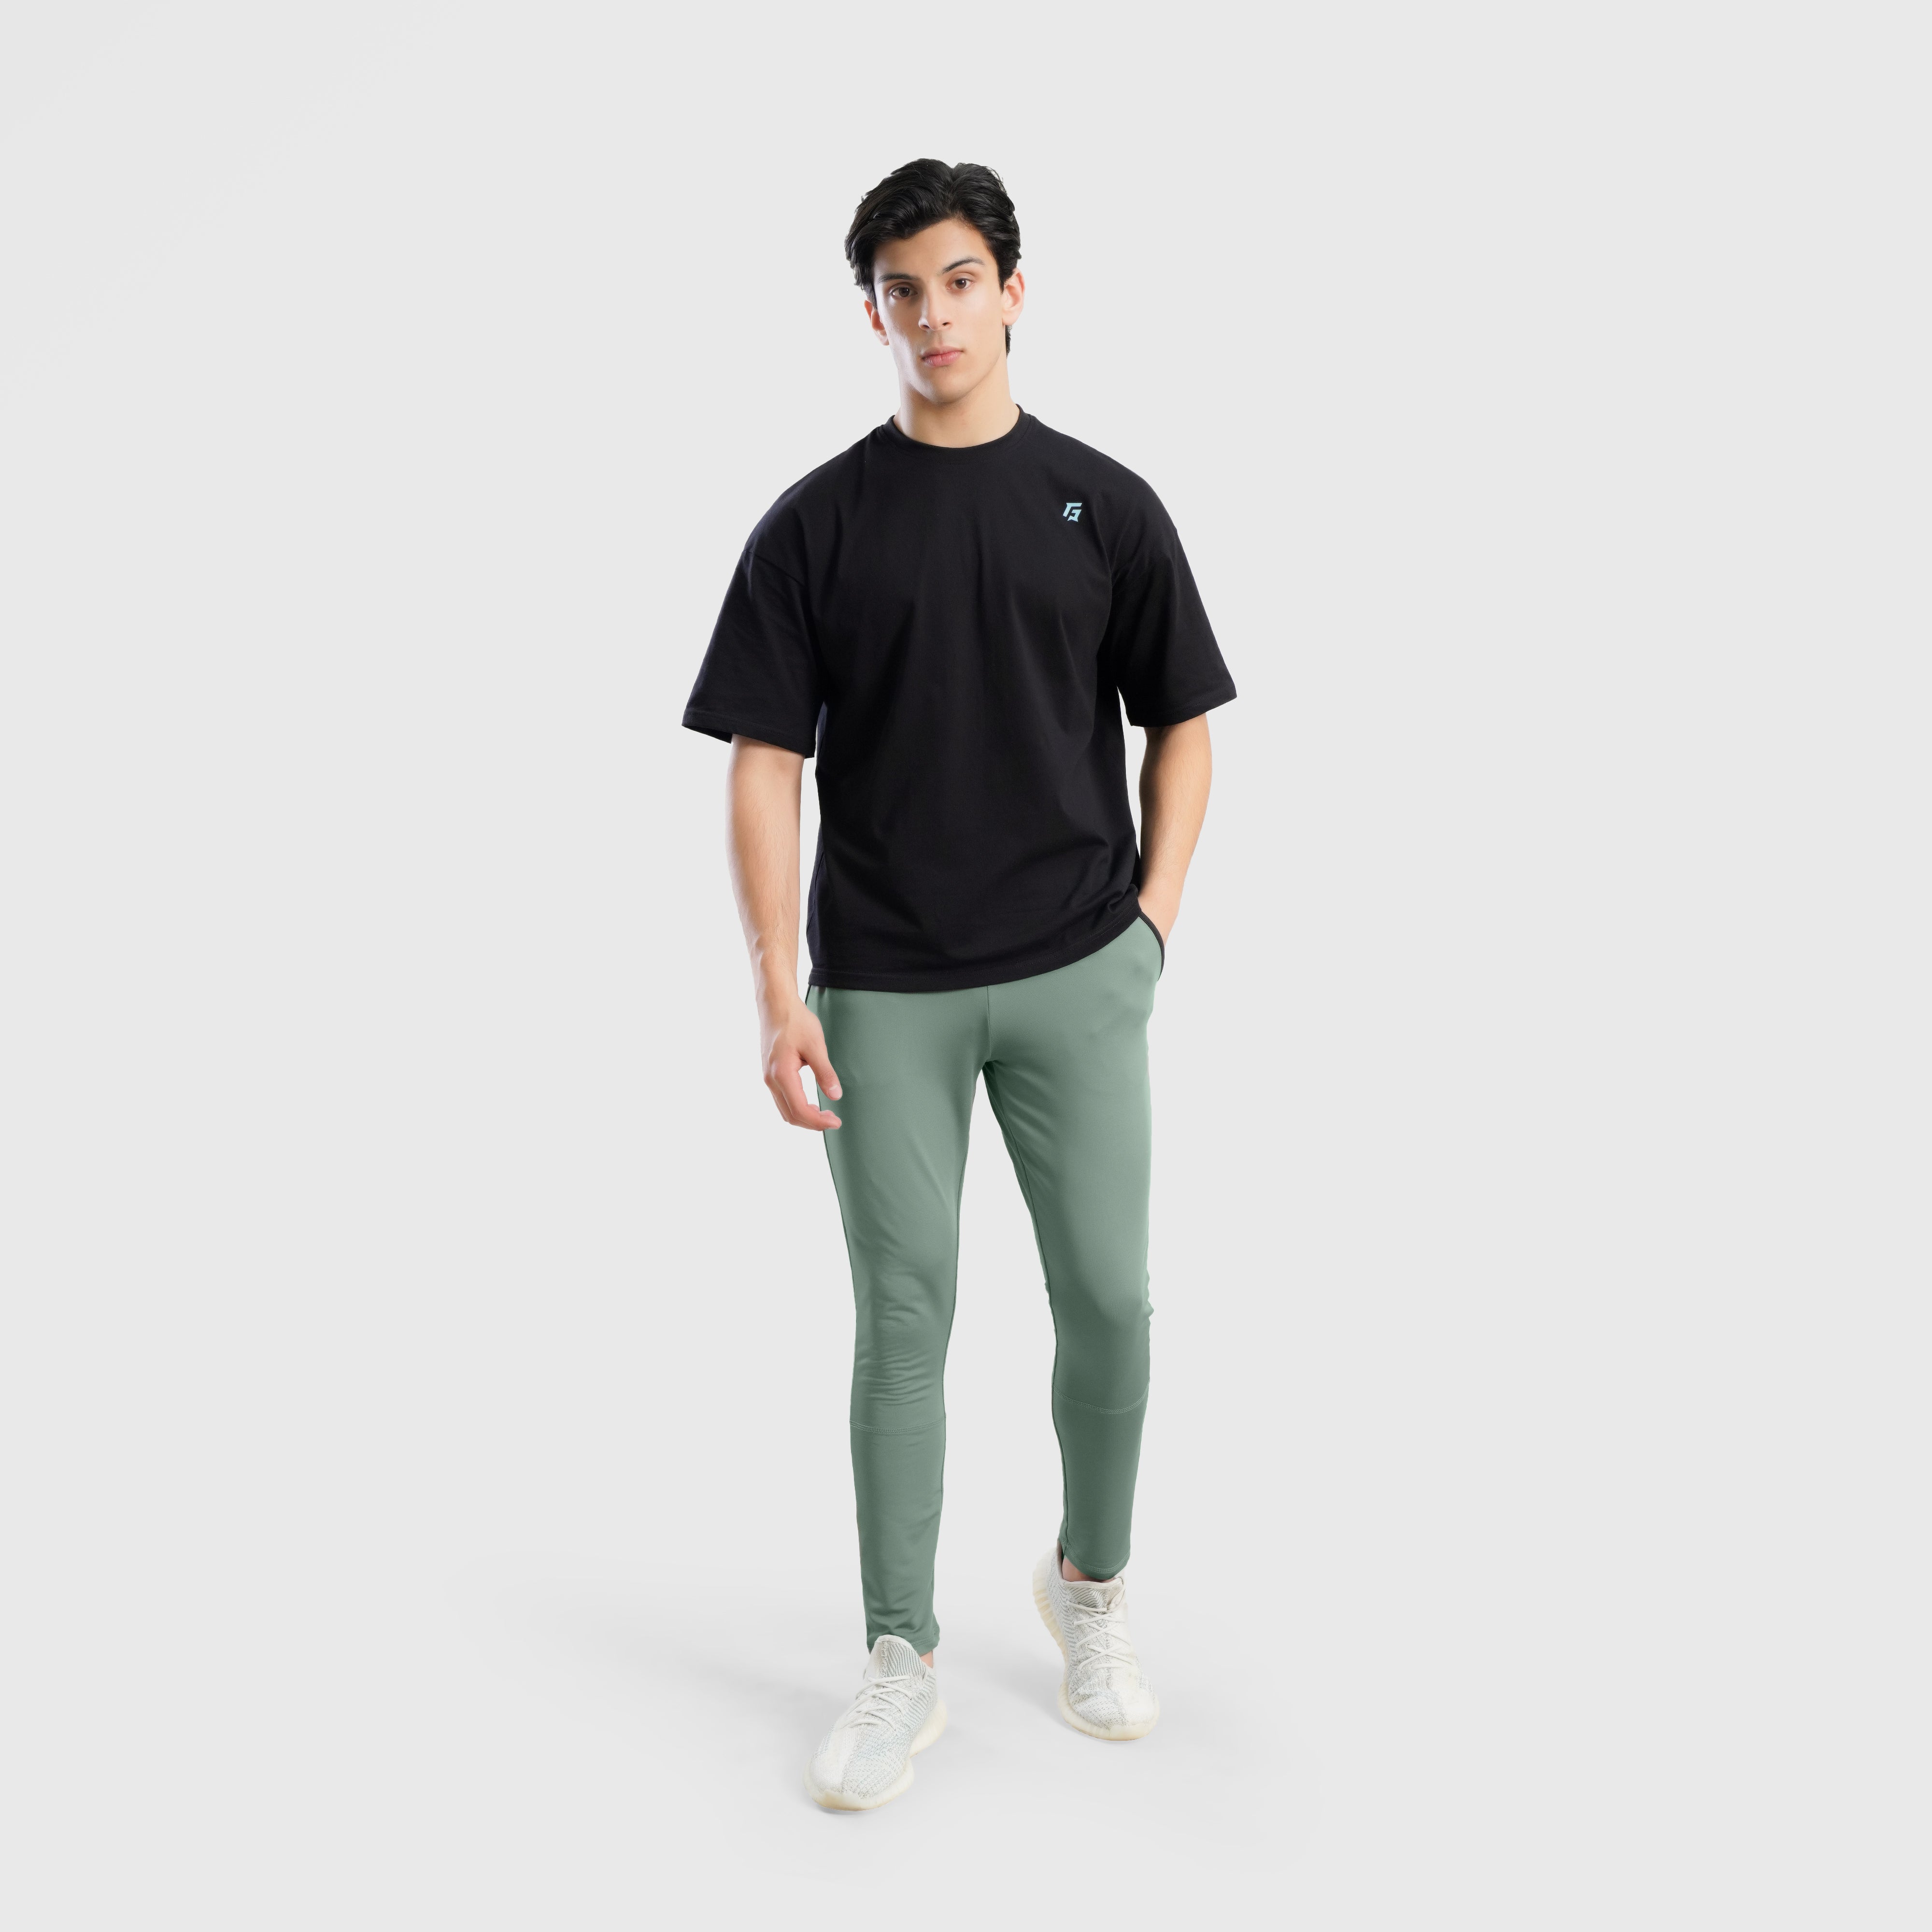 Pro Fit Trousers (Green)